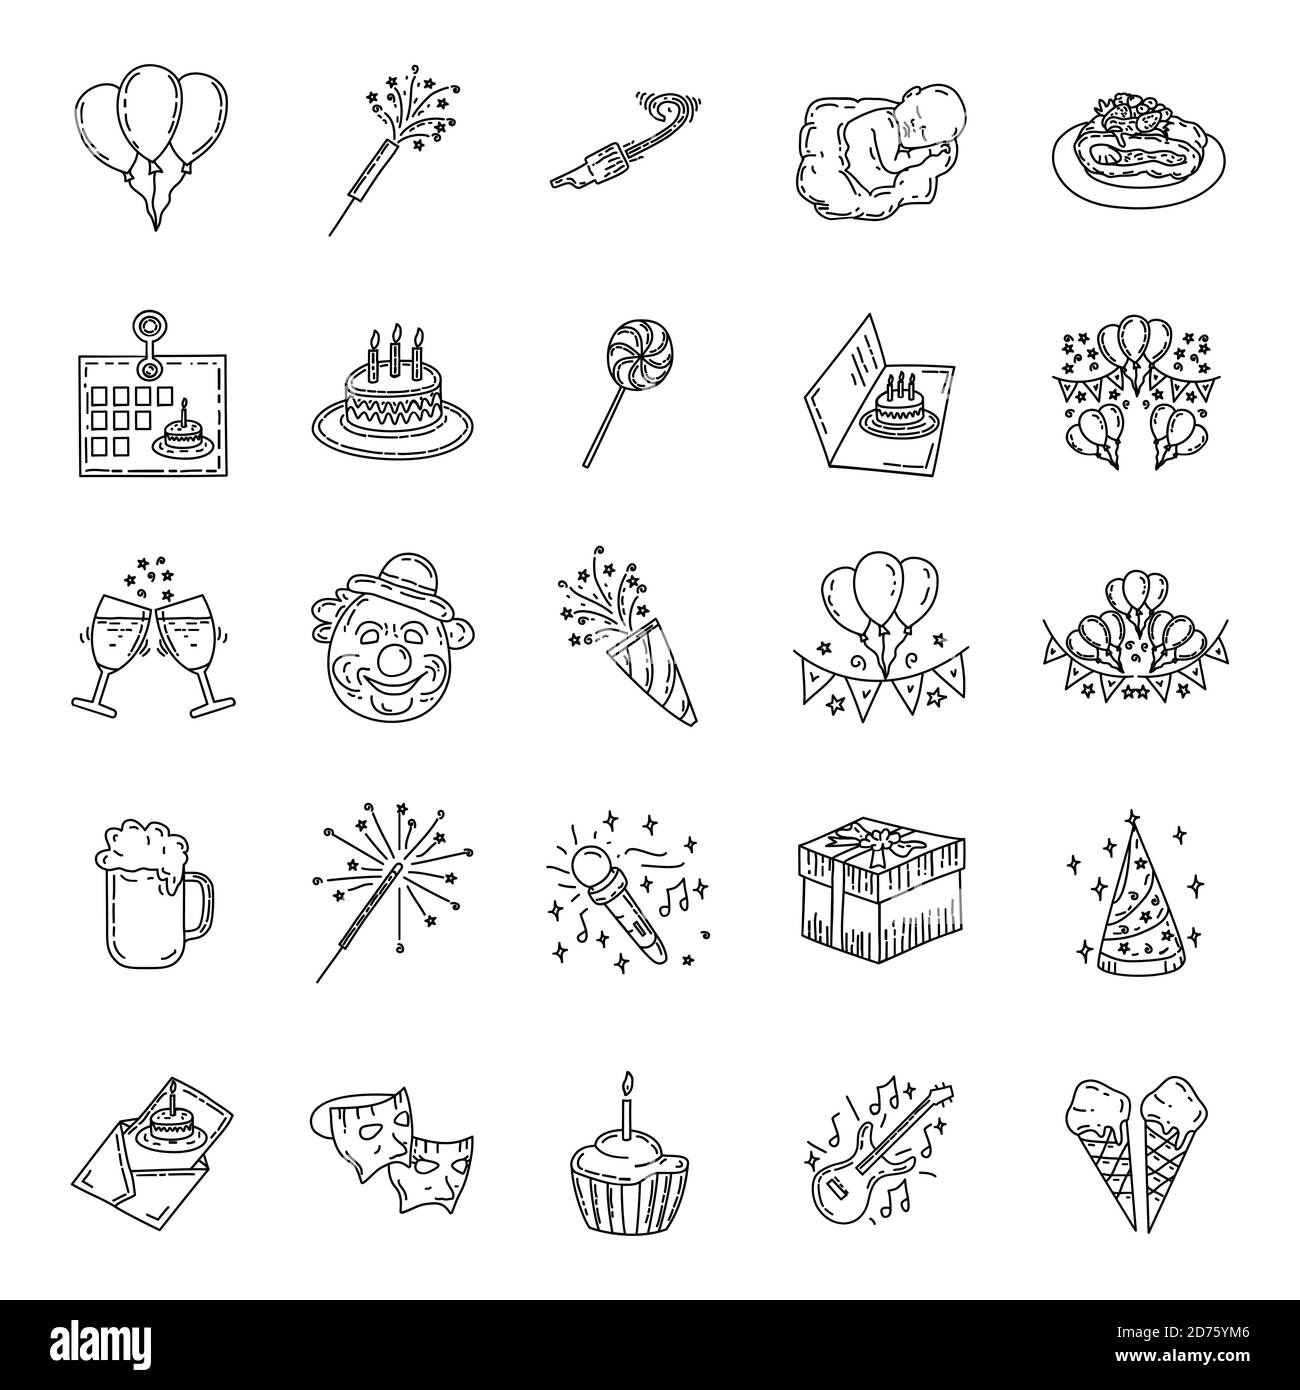 Birthday Set Icon Vector. hand drawn style. doodle art style. Stock Vector